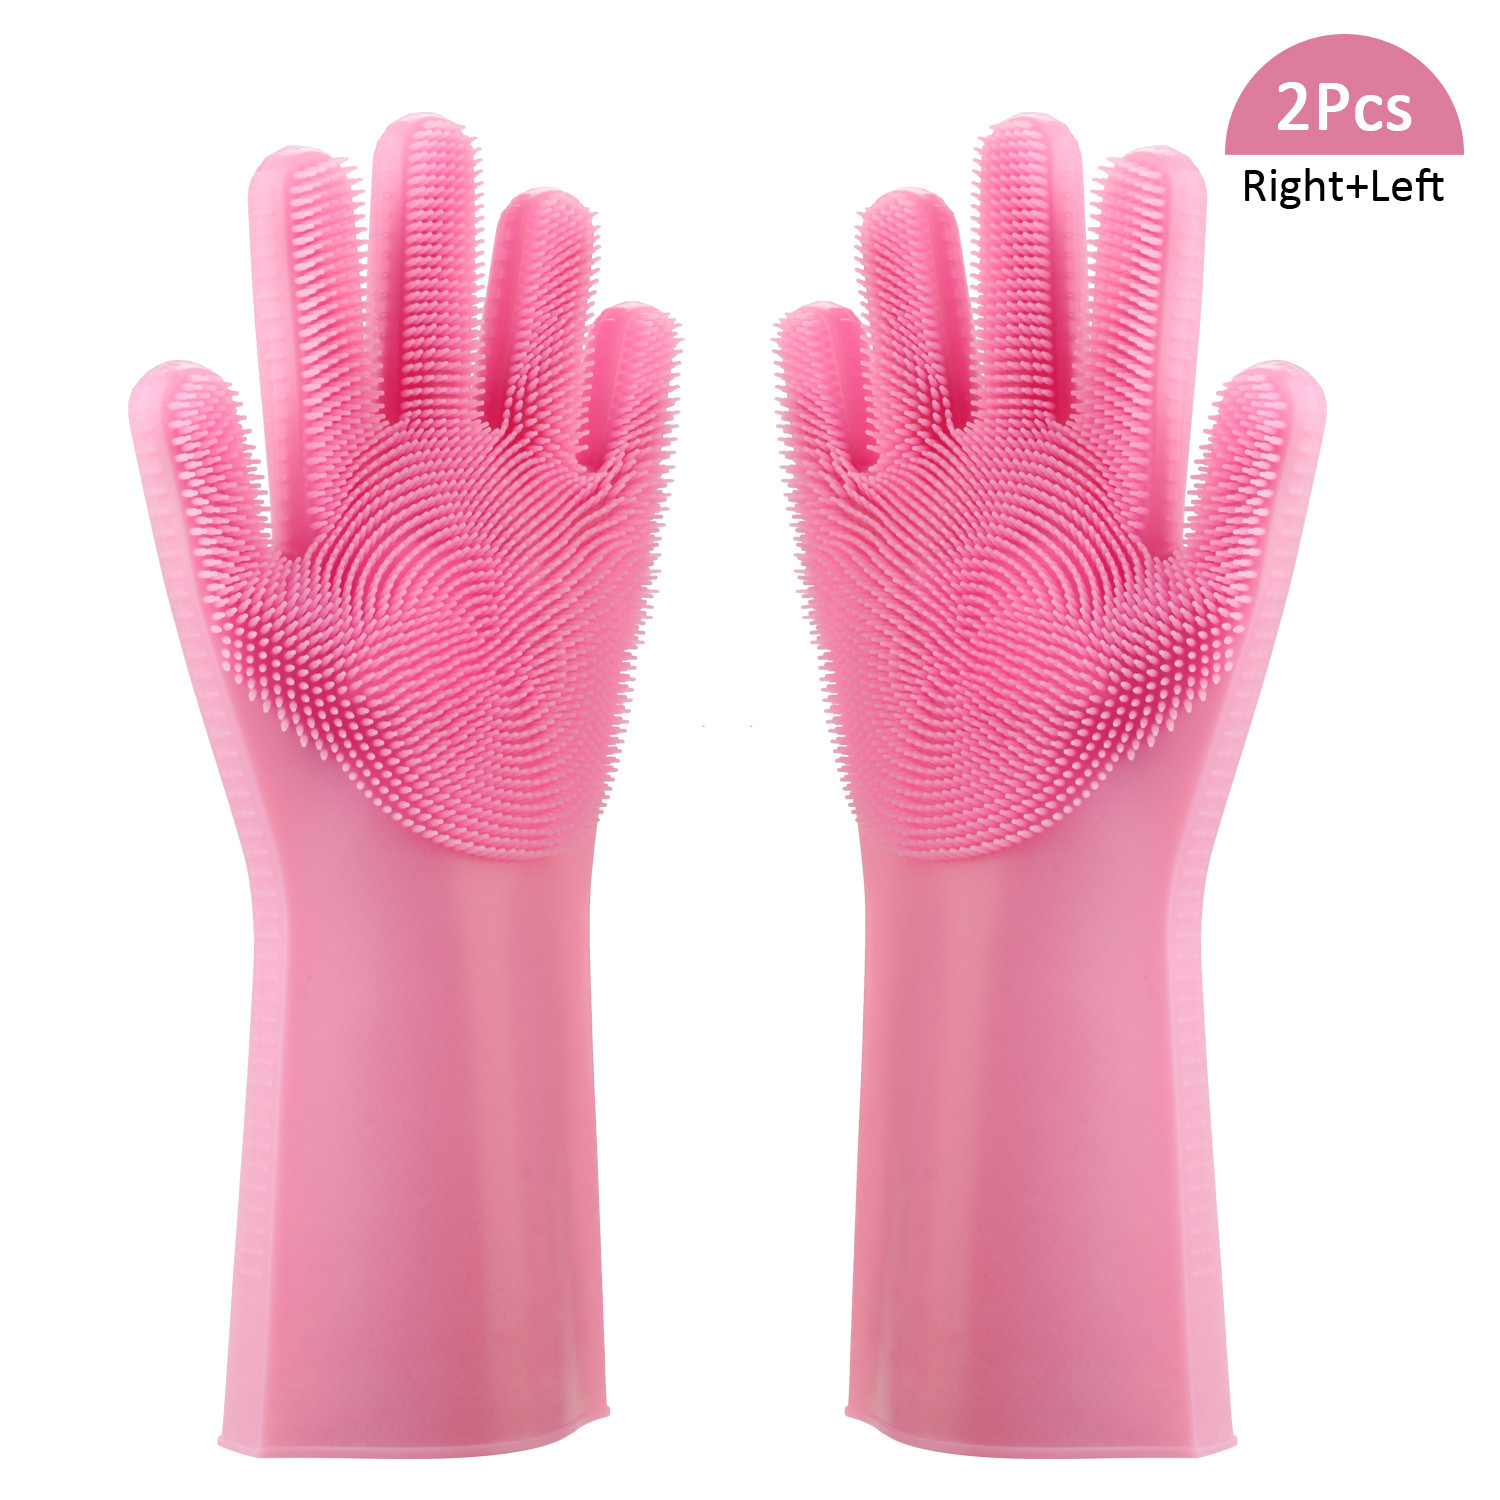 Silicone Cleaning Gloves Brush Scrubber